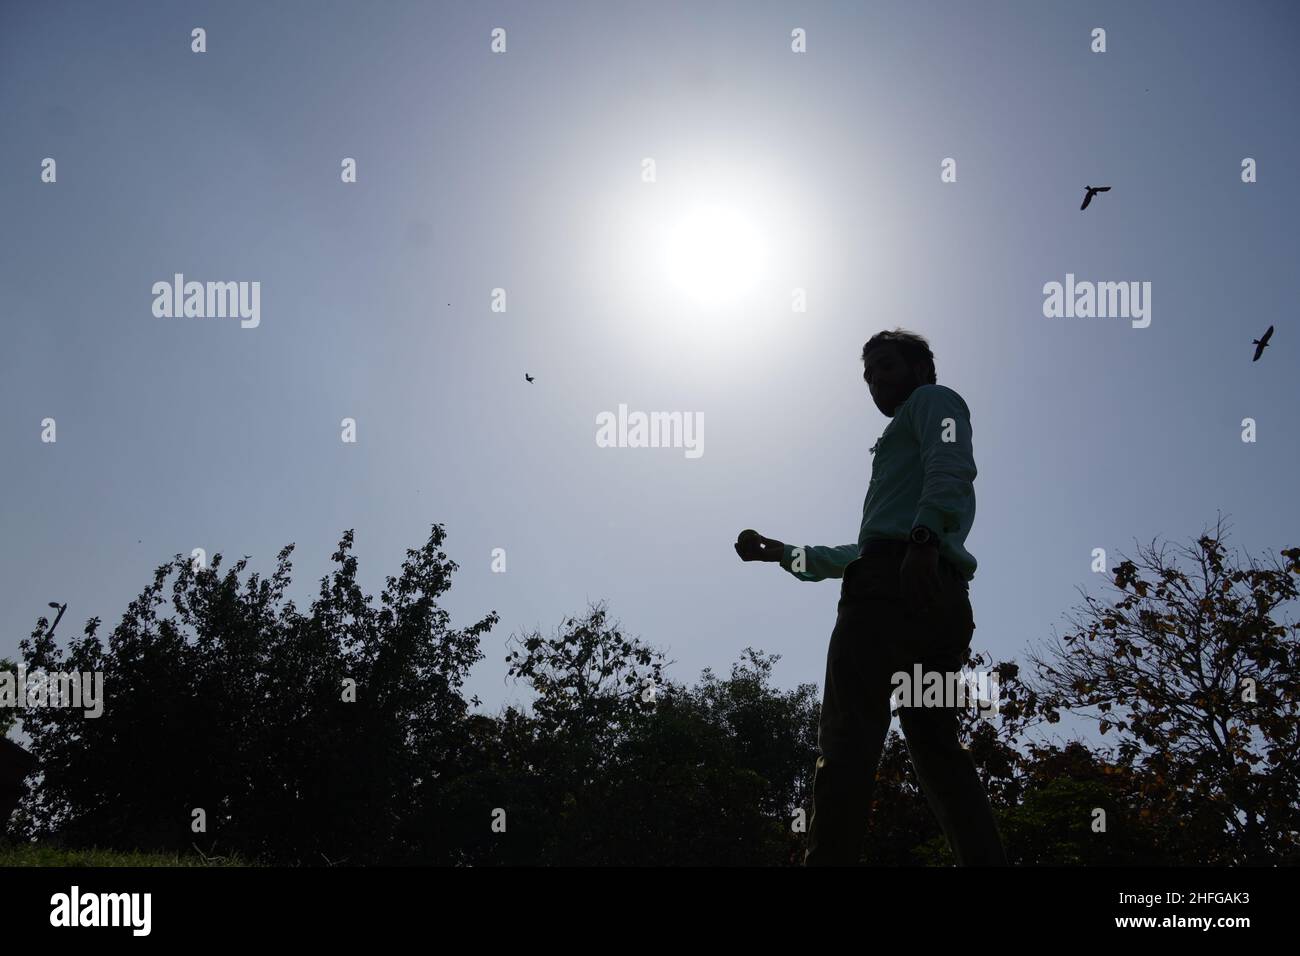 Indian man in action of catching ball in cricket match Stock Photo